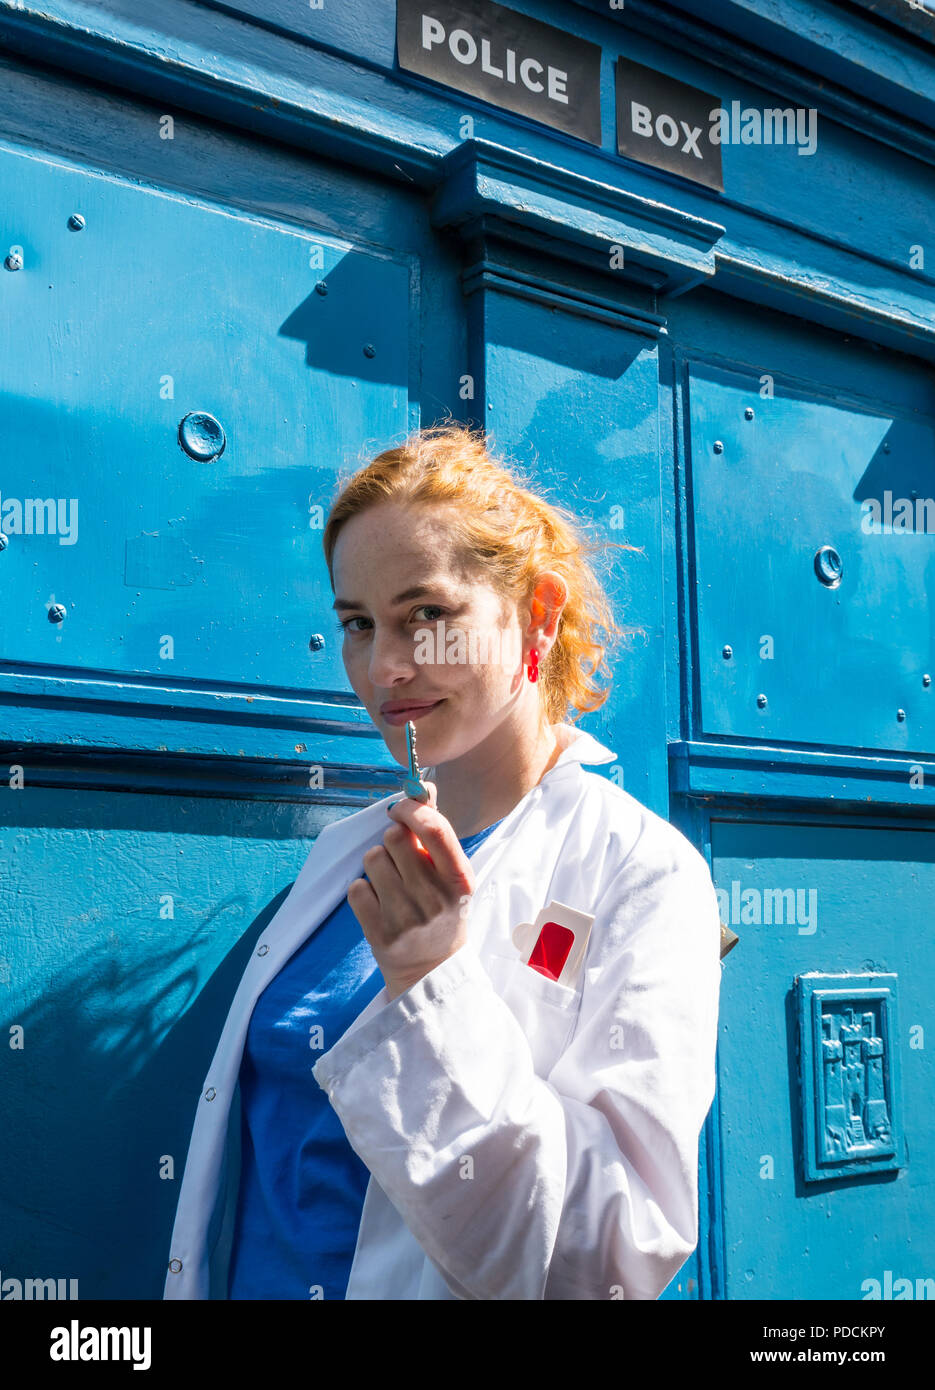 Edinburgh, Scotland, UK. 9th August 2018. Edinburgh Fringe Festival Photocall, Police Call Box, Leamington Terrace, Dr Rosy Carrick is a writer, performer, translator and compere. In her show, Passionate Machine, Rosy builds a time machine to rescue her future self, stuck 100 years in the past. Rosy in her time travelling costume trying to unlock a Tardis Stock Photo